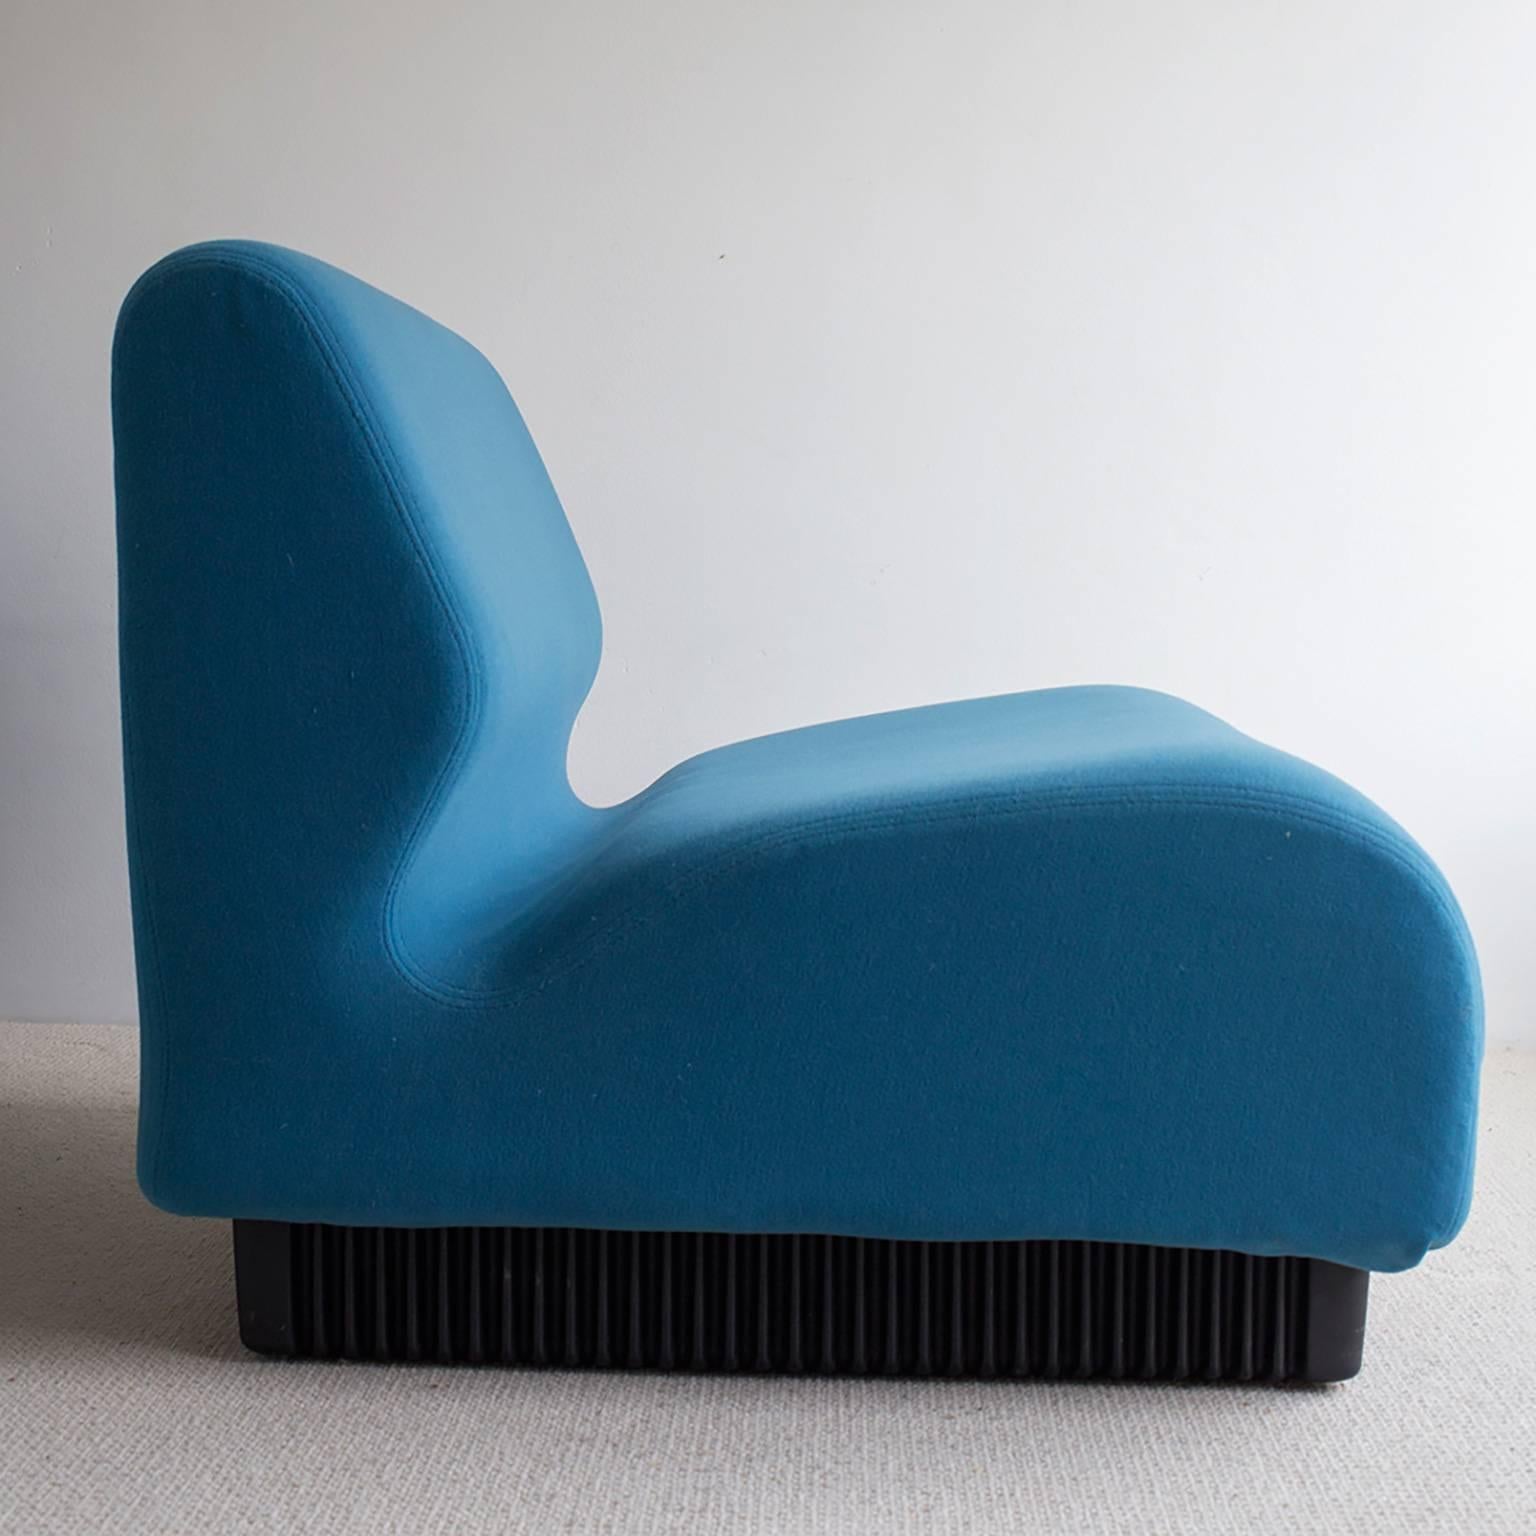 Modular Settee by Don Chadwick for Herman Miller In Good Condition In Amsterdam, Noord Holland